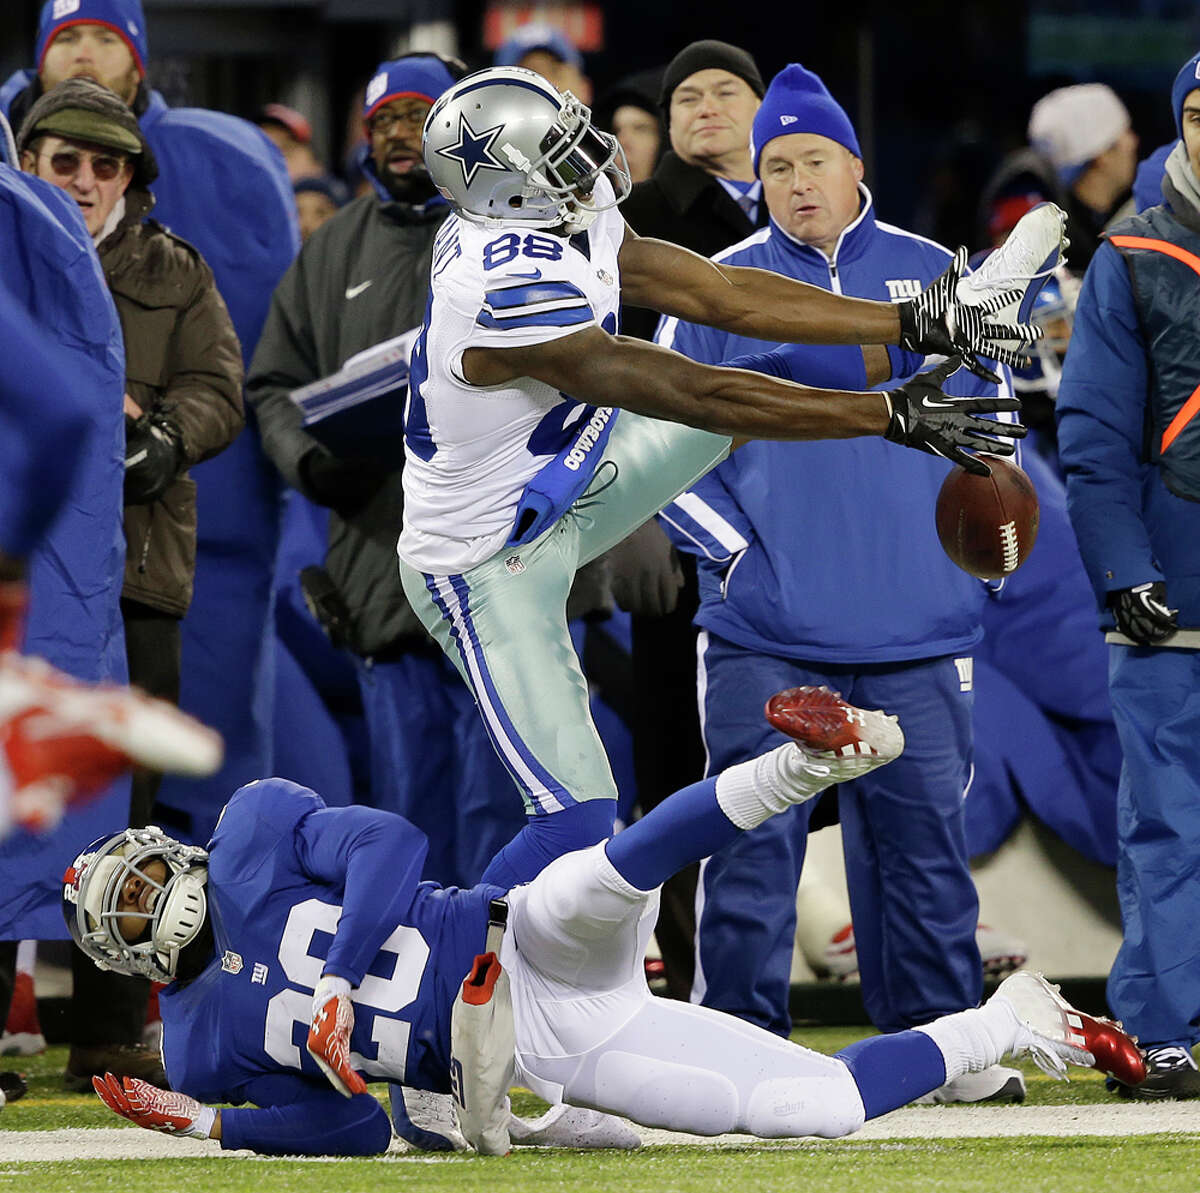 Dallas Cowboys wide receiver Dez Bryant, top, is unable to catch a pass from quarterback Tony Romo as New York Giants cornerback Prince Amukamara (20) defends on the play during the second half of an NFL football game, Sunday, Nov. 24, 2013, in East Rutherford, N.J. (AP Photo/Seth Wenig)